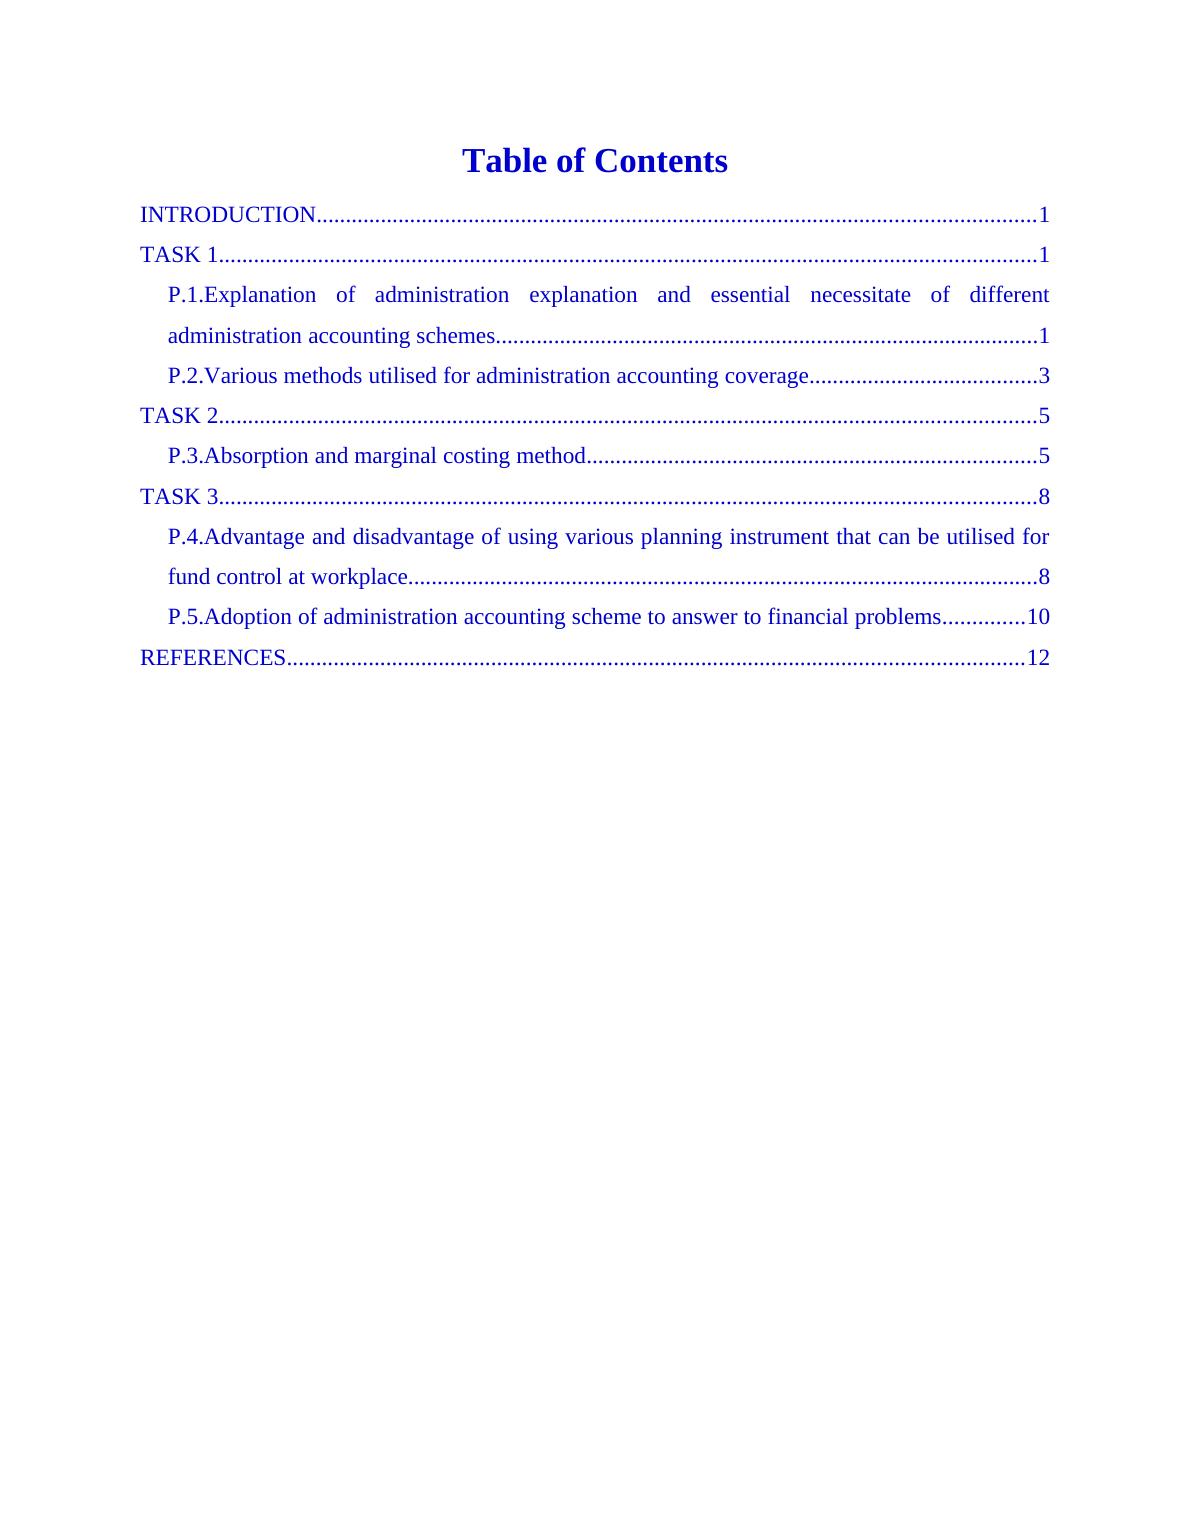 Various Administration Accounting Schemes for Fund Control_2